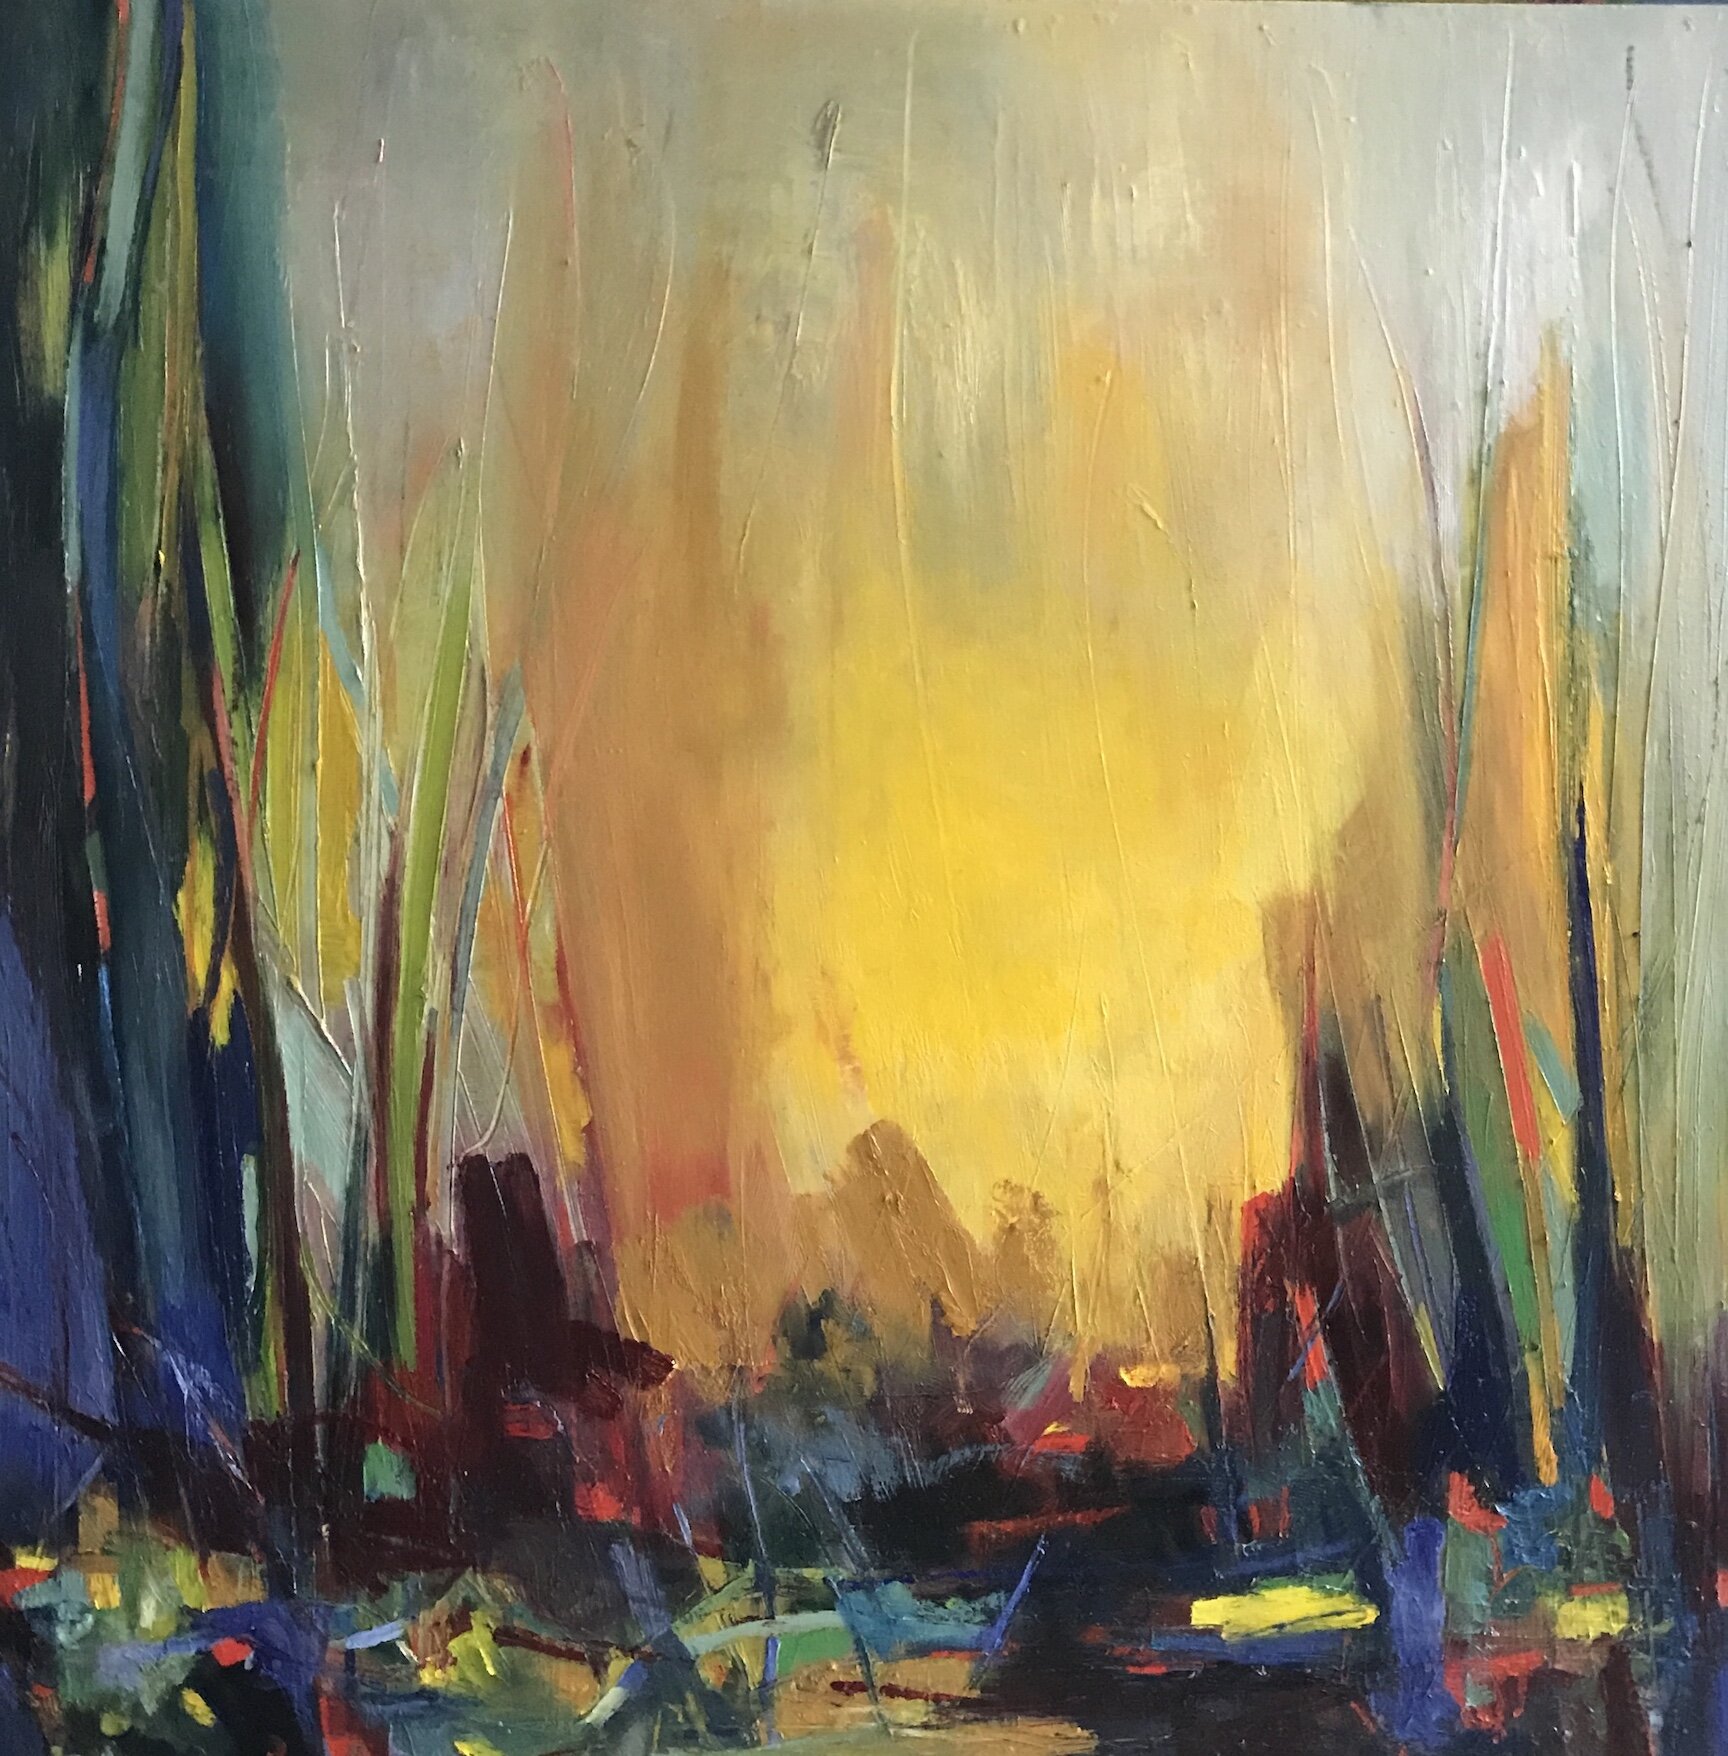    Recent Route I  , oil on canvas, 36” x 36” 